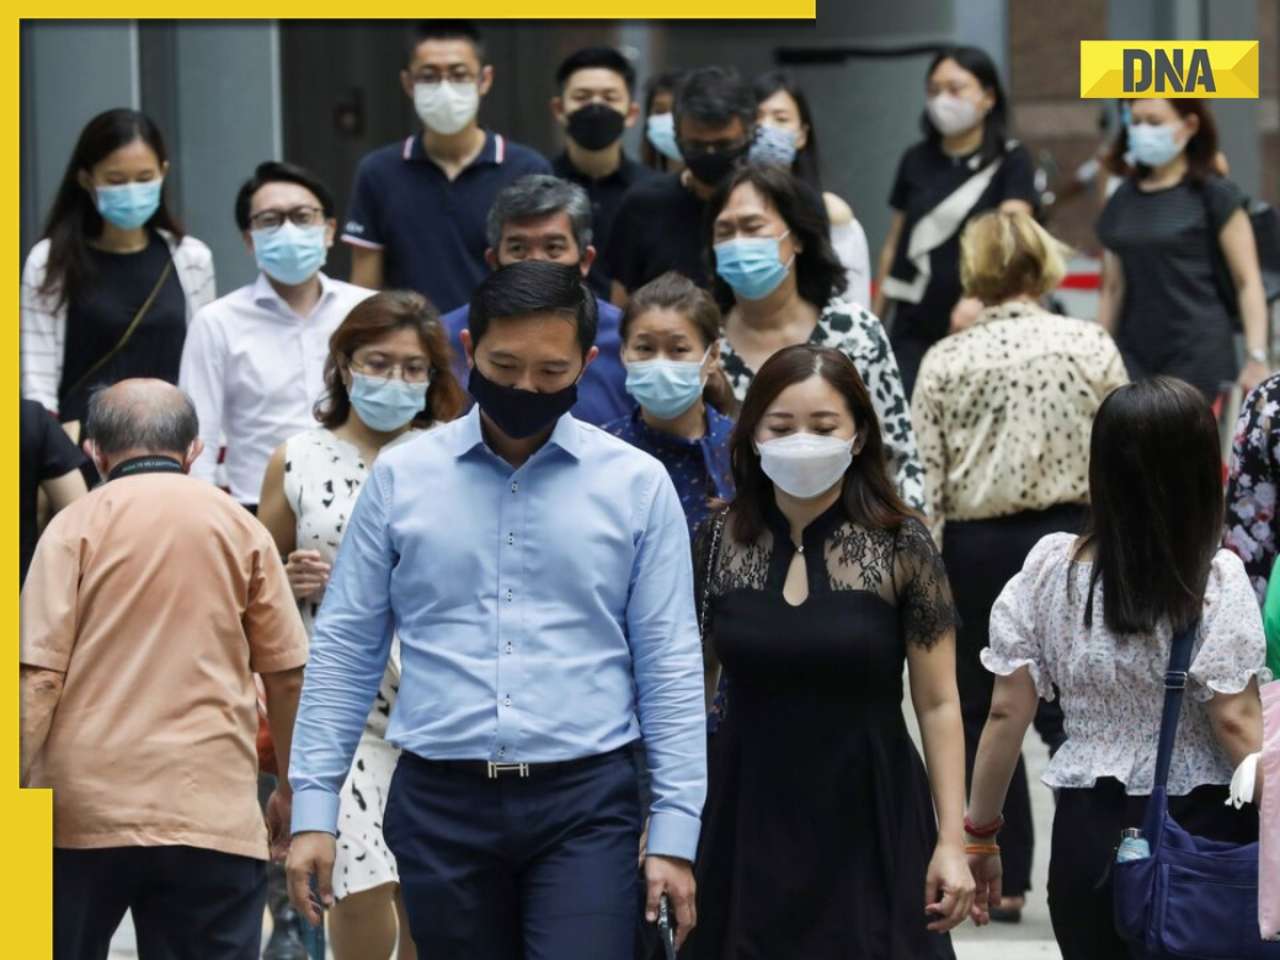 This country braces for COVID-19 surge, around 26,000 cases in 7 days, citizens urged to wear masks